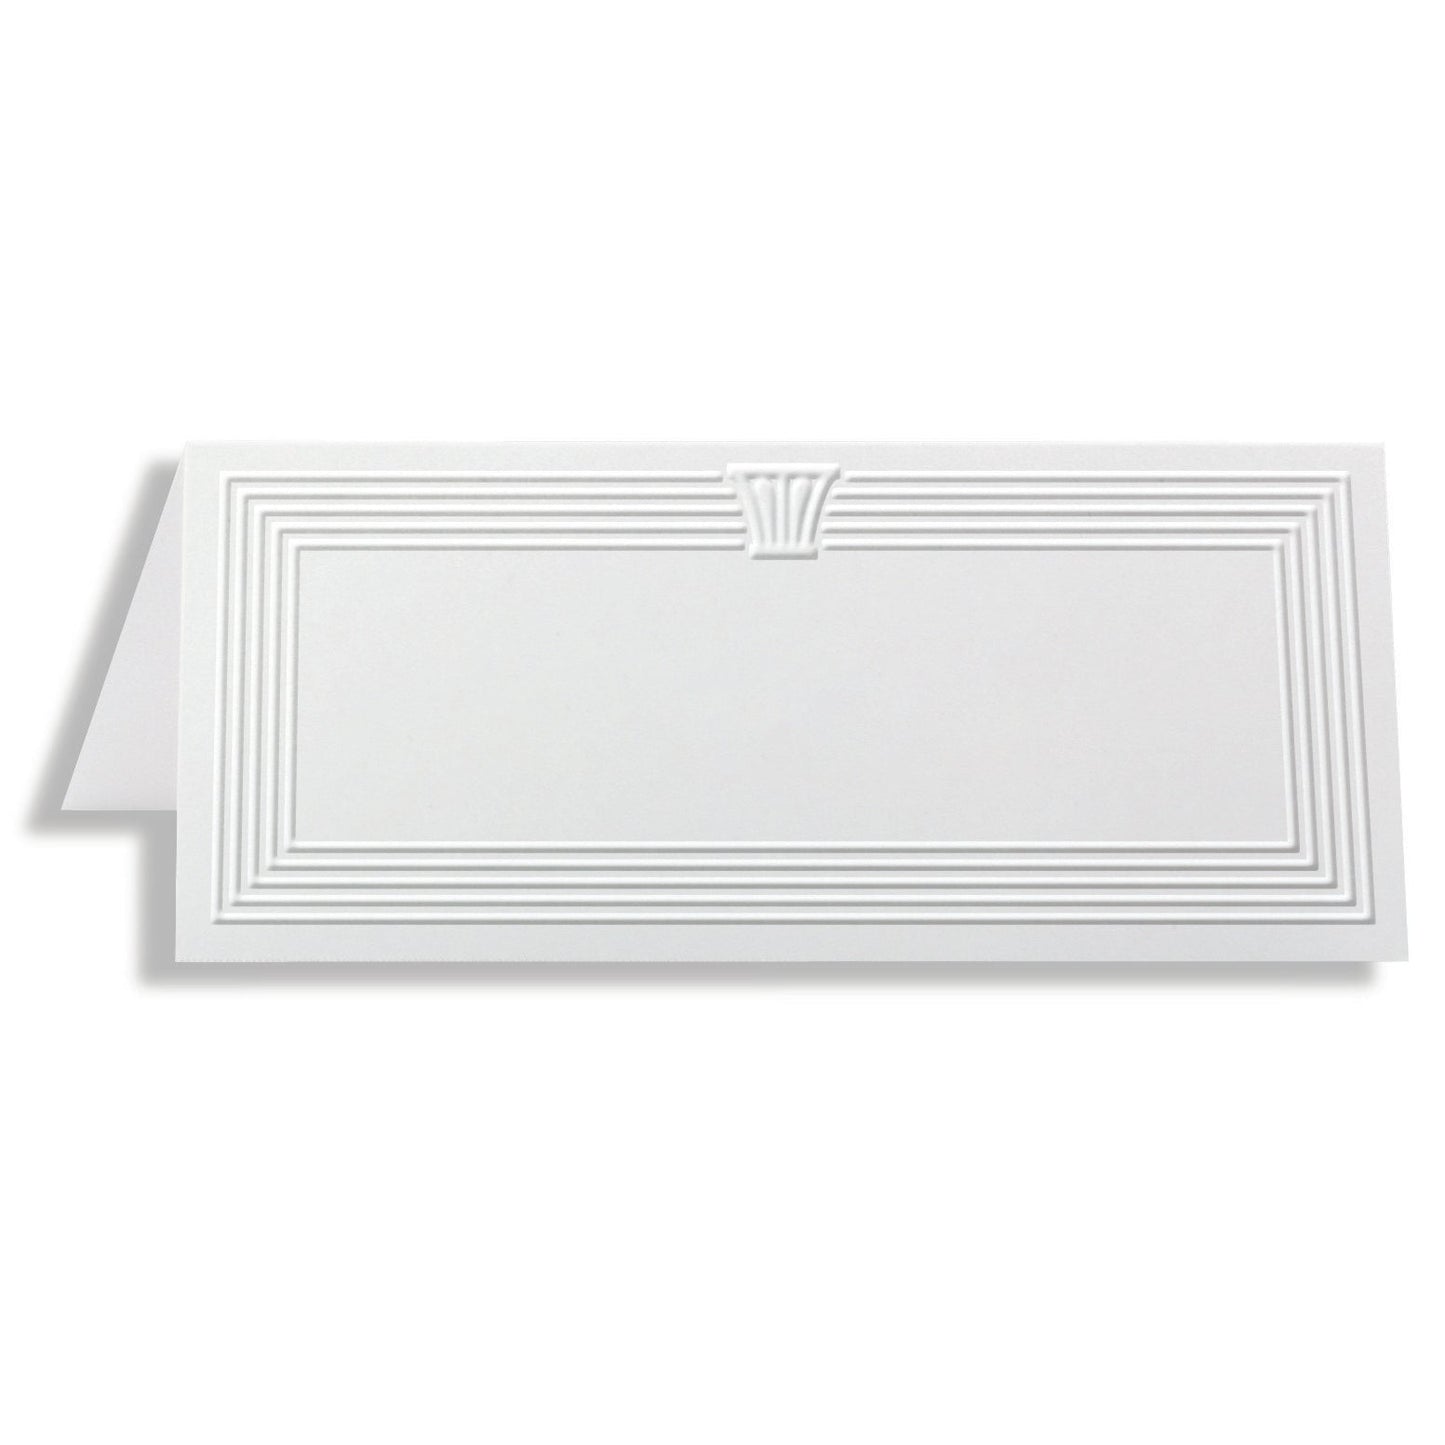 St. James® Overtures® Capital Embossed Place Cards, White, Fold to 1¾ x 4¼", Pack of 60